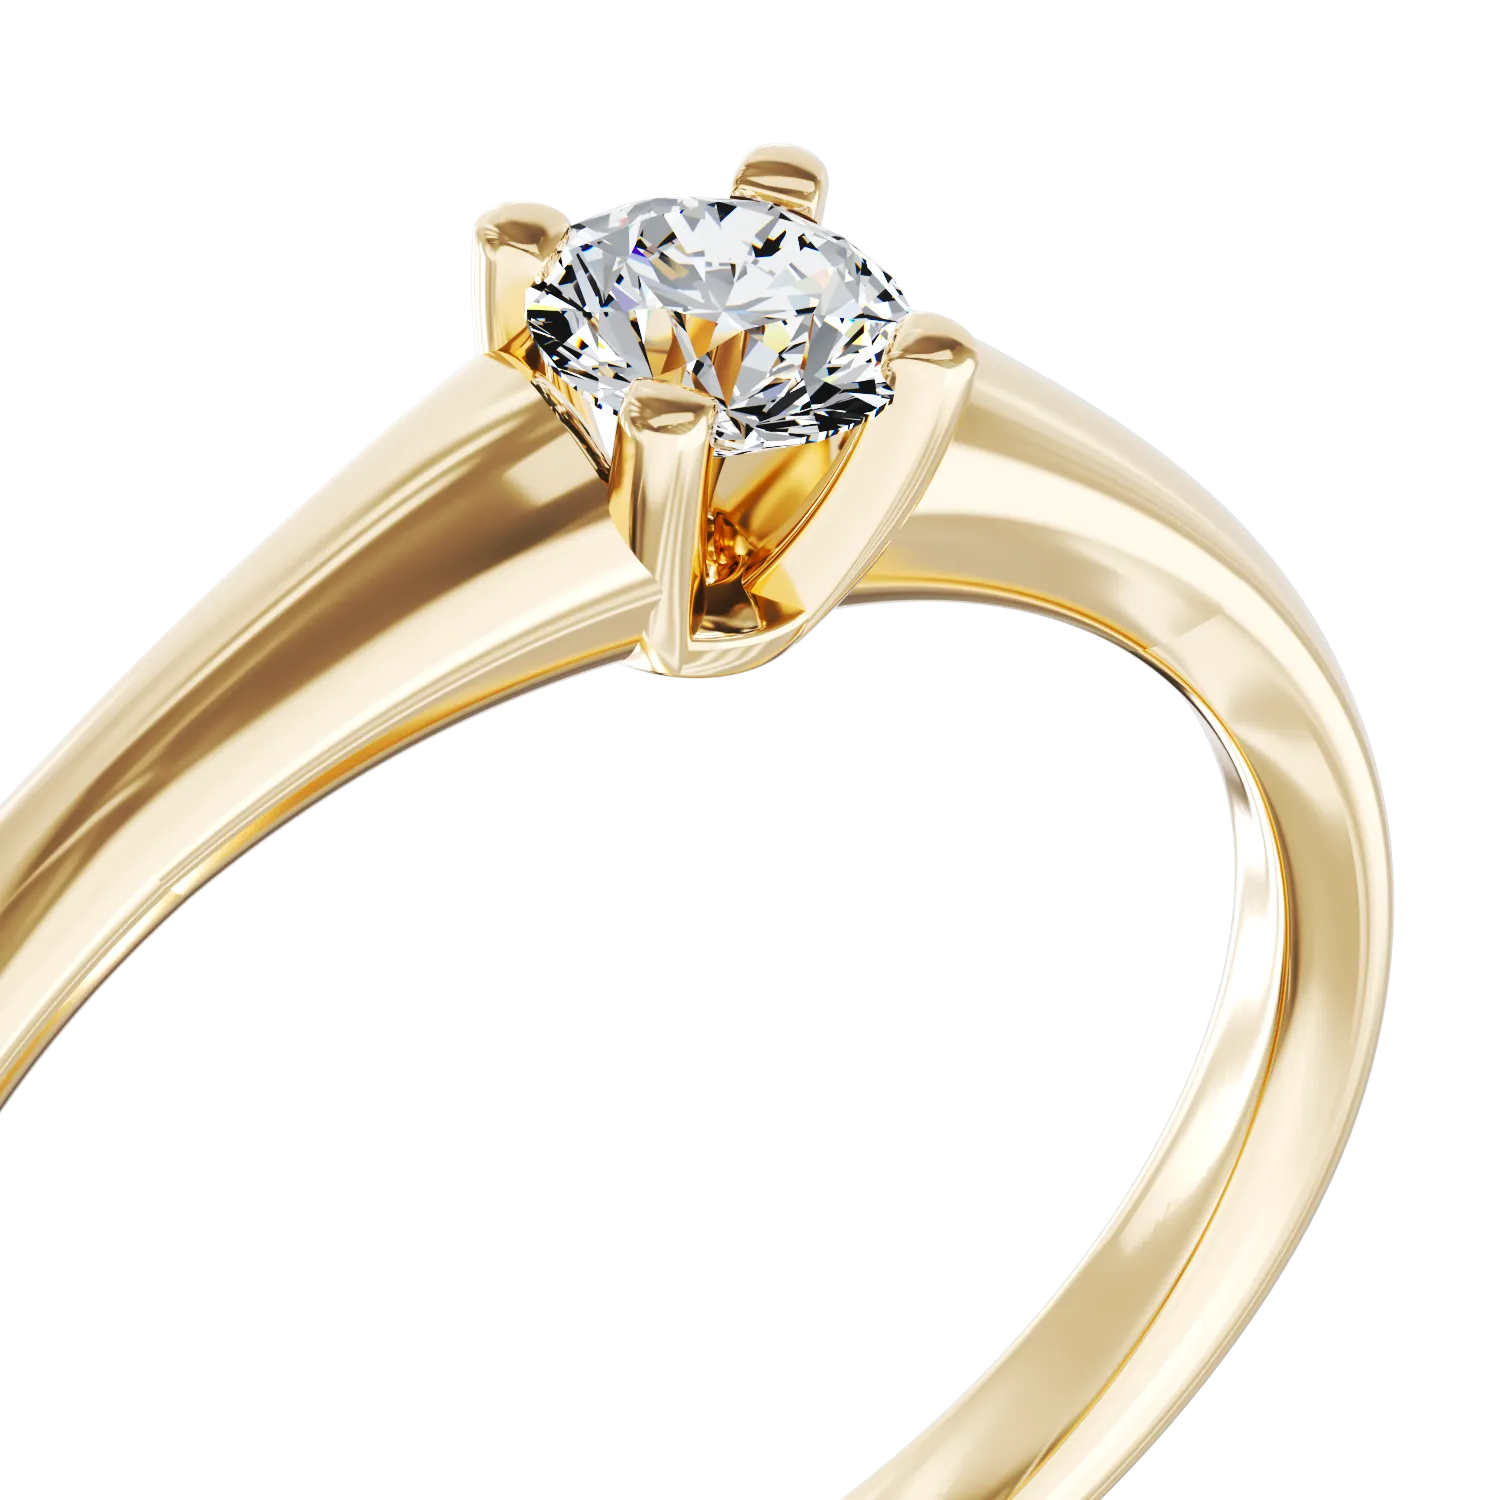 18K yellow gold engagement ring with a 0.145ct solitaire diamond